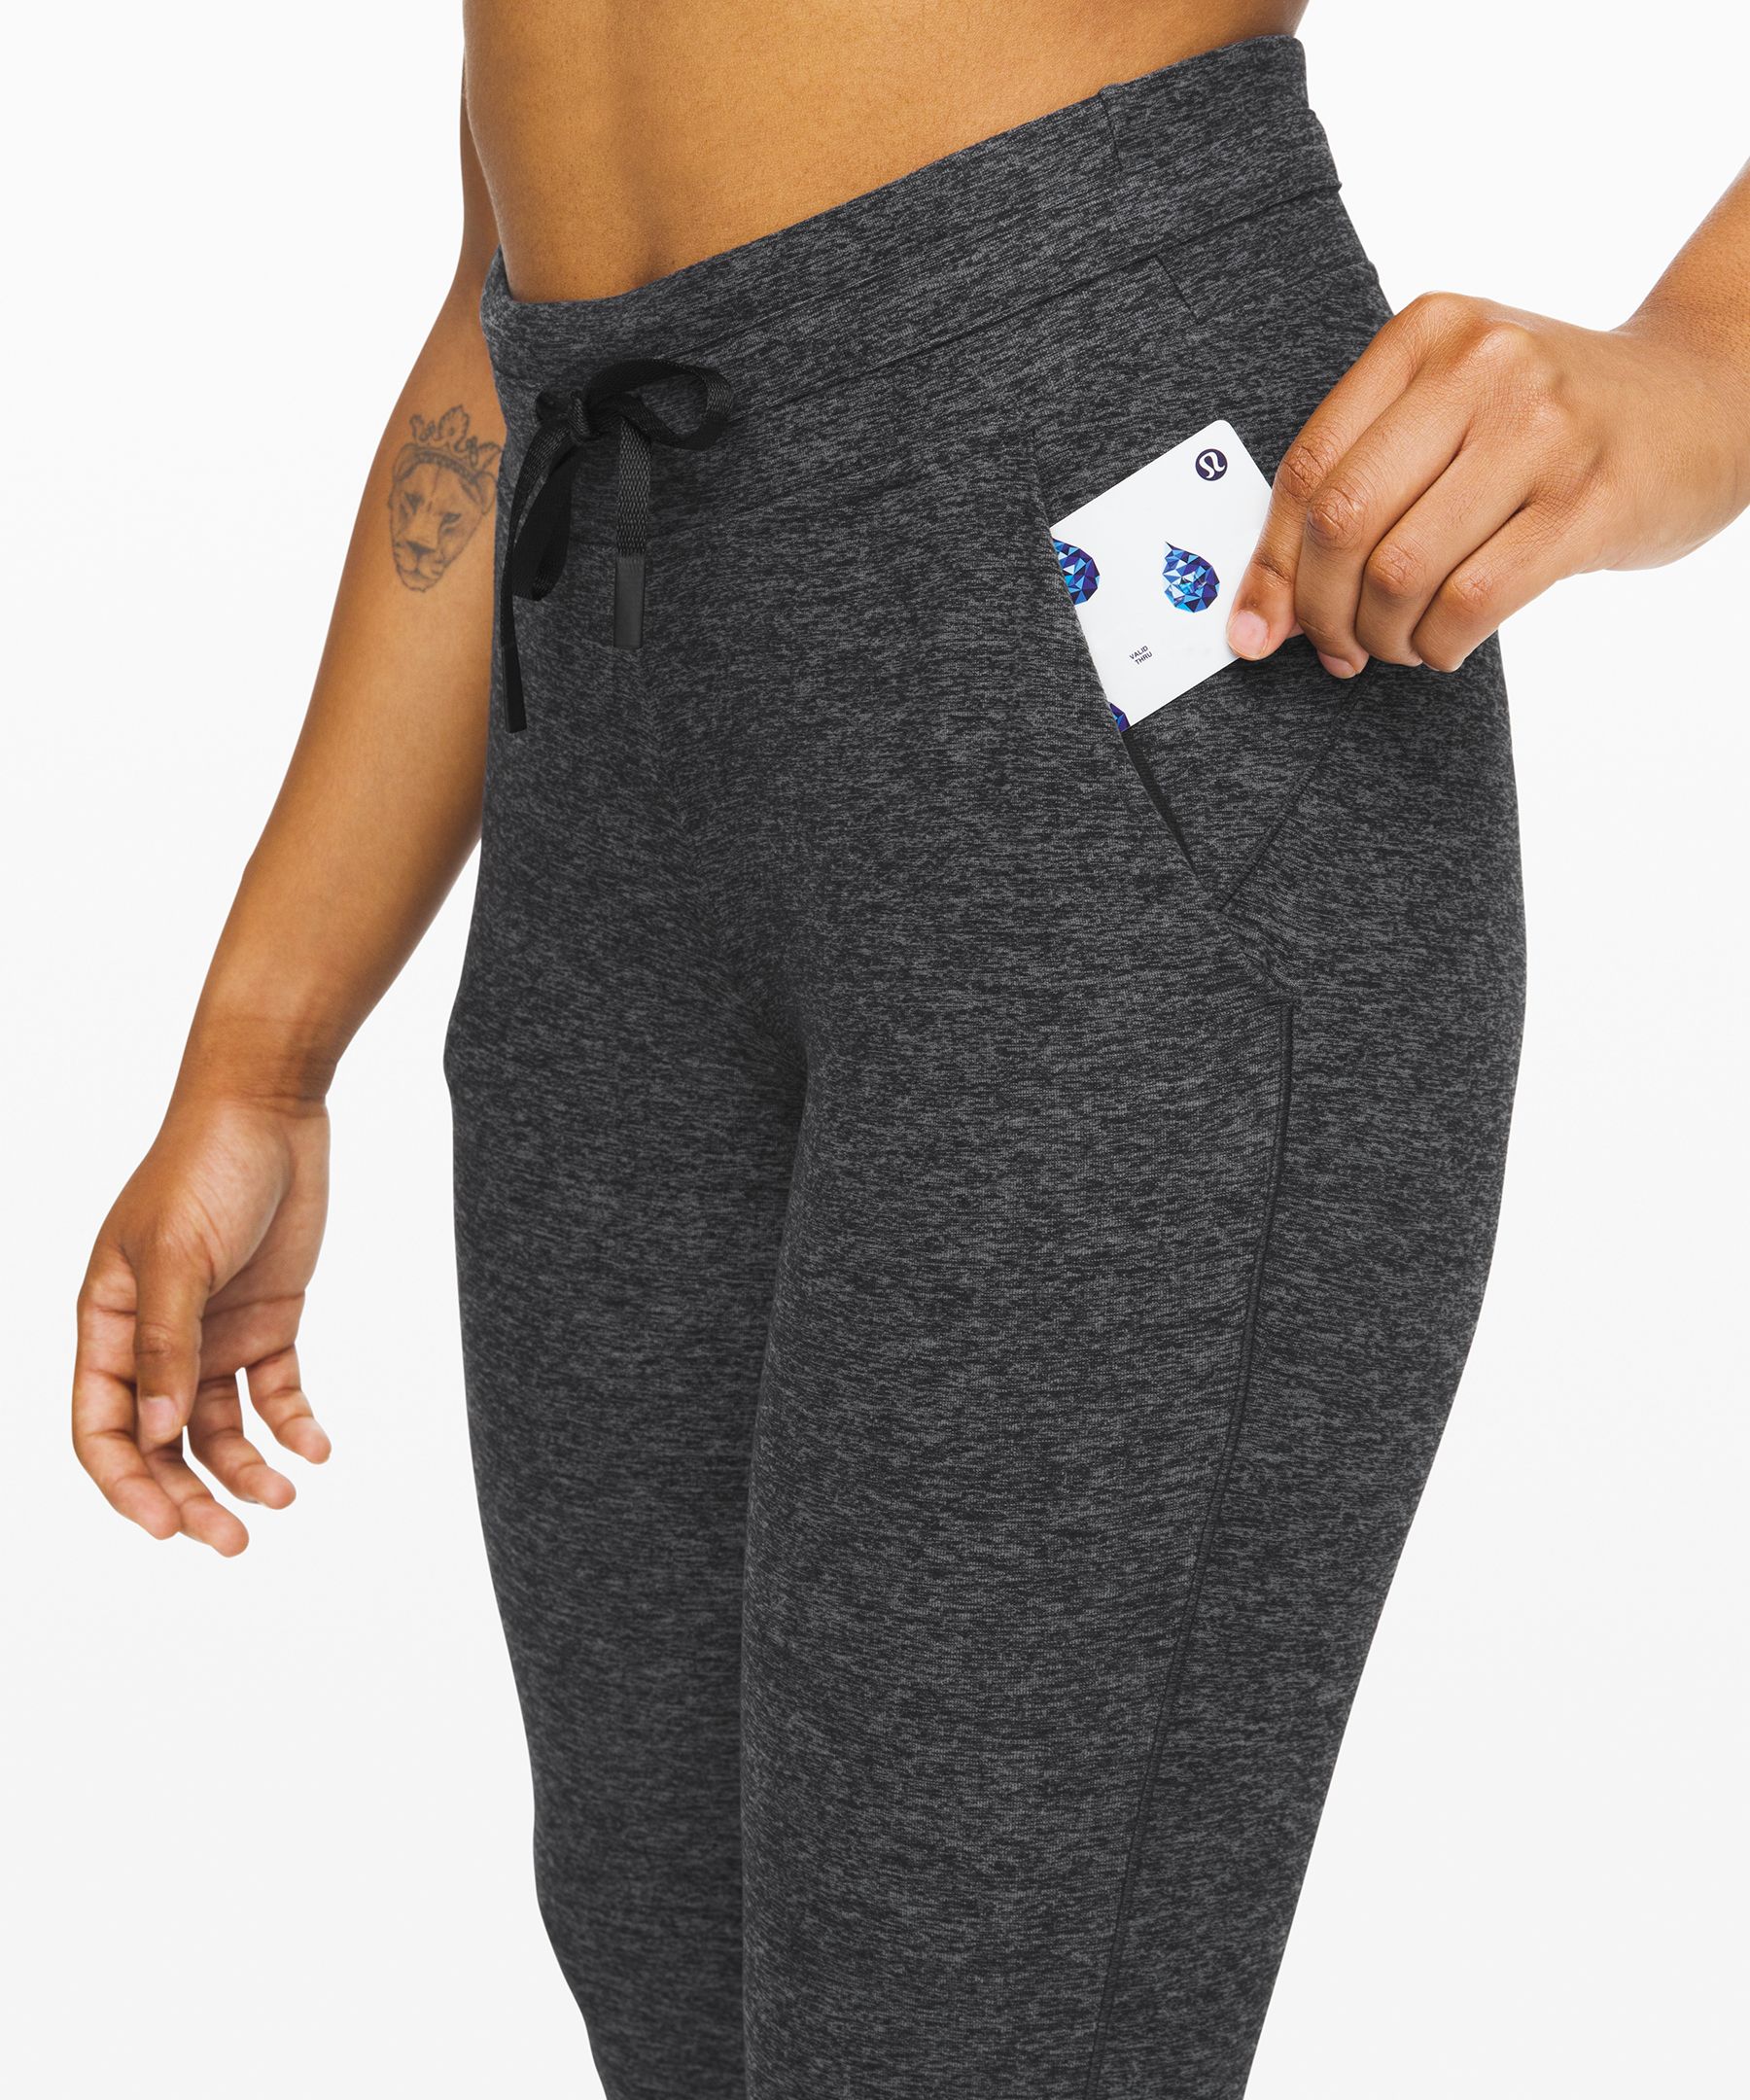 Lululemon rulu jogger Size 6 - $50 (57% Off Retail) - From Paige